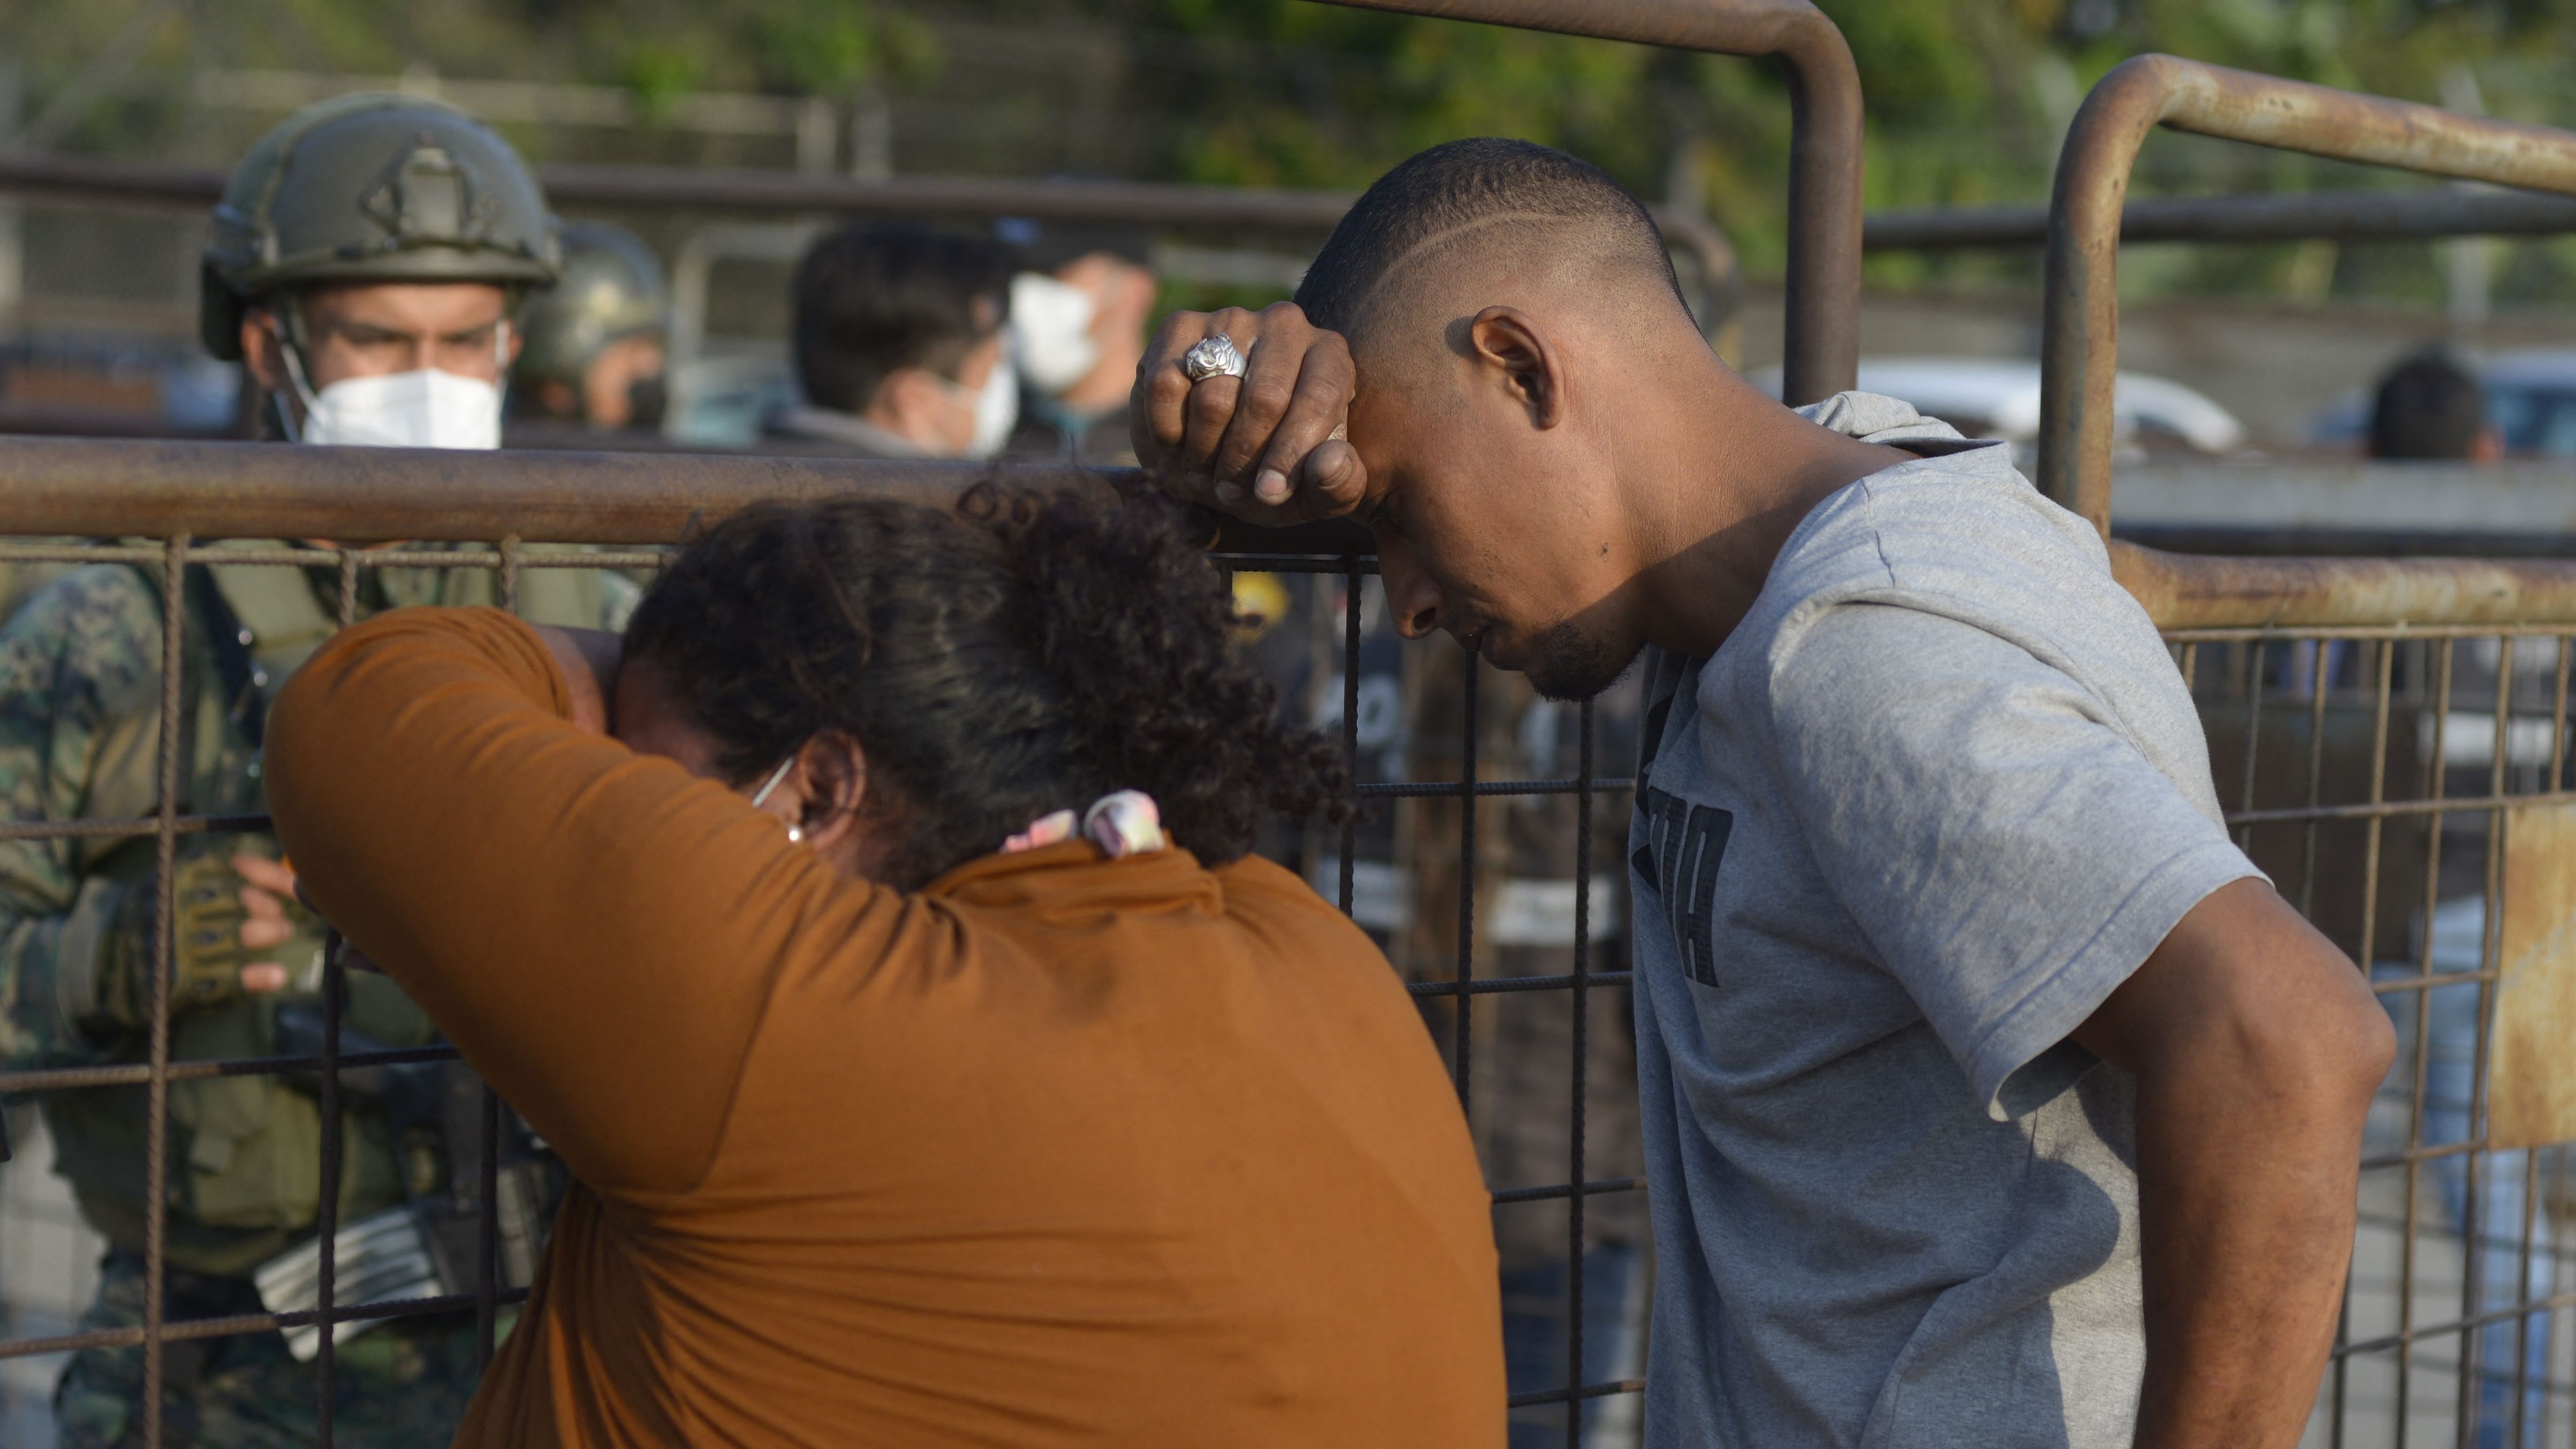 Relatives of inmates wait for news after a prison riot in Guayaquil, Ecuador